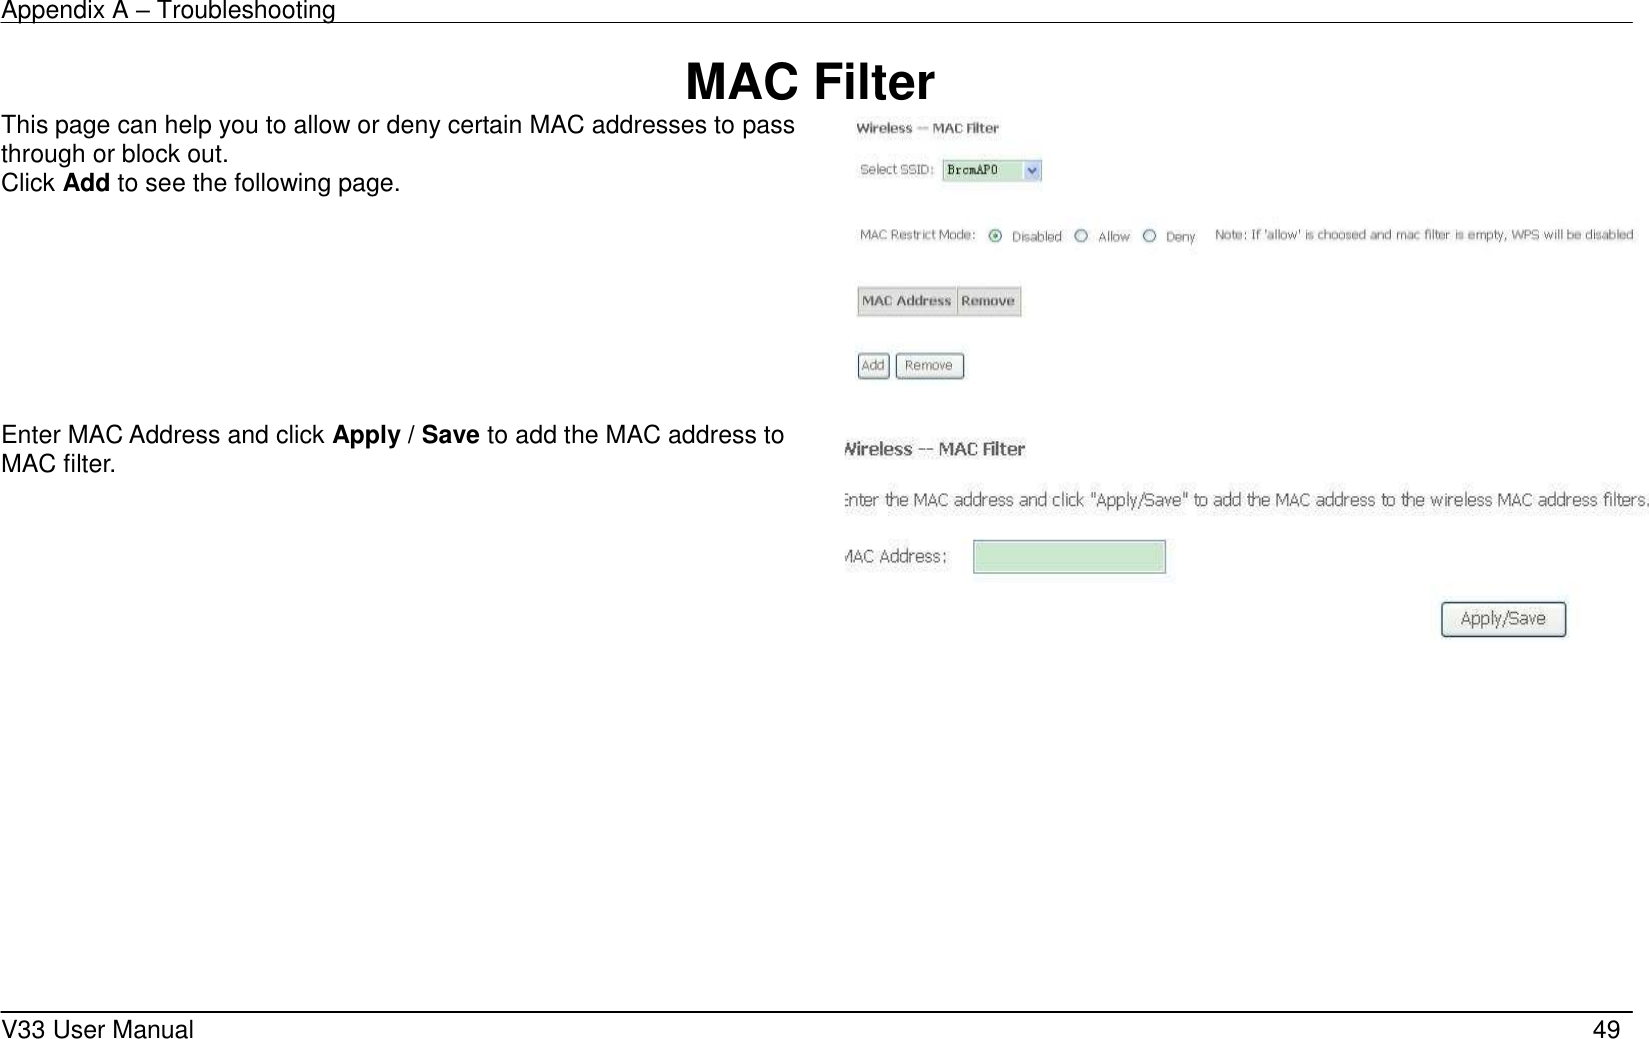 Appendix A – Troubleshooting    V33 User Manual   49 MAC Filter This page can help you to allow or deny certain MAC addresses to pass through or block out. Click Add to see the following page.    Enter MAC Address and click Apply / Save to add the MAC address to MAC filter.     